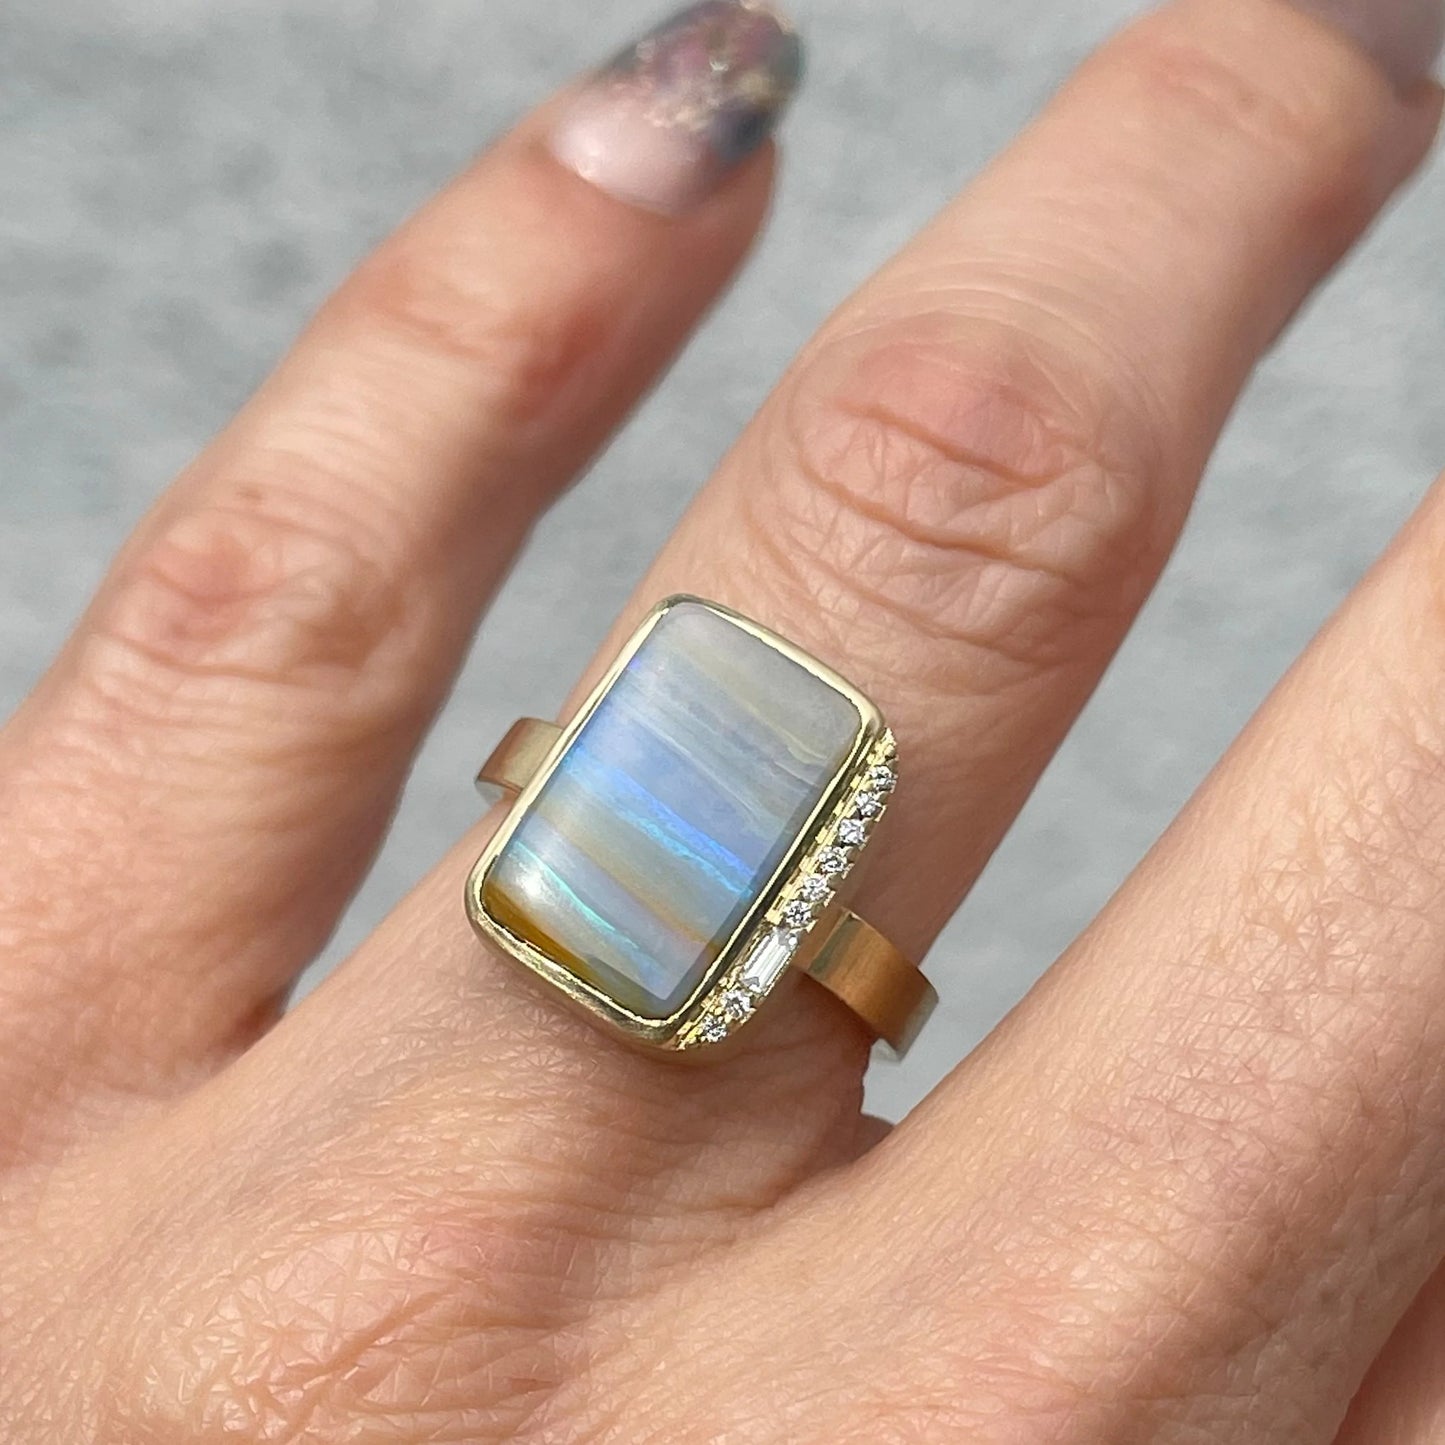 An Australian Opal Ring by NIXIN Jewelry modeled on a hand showing the blue opal and baguette diamond.